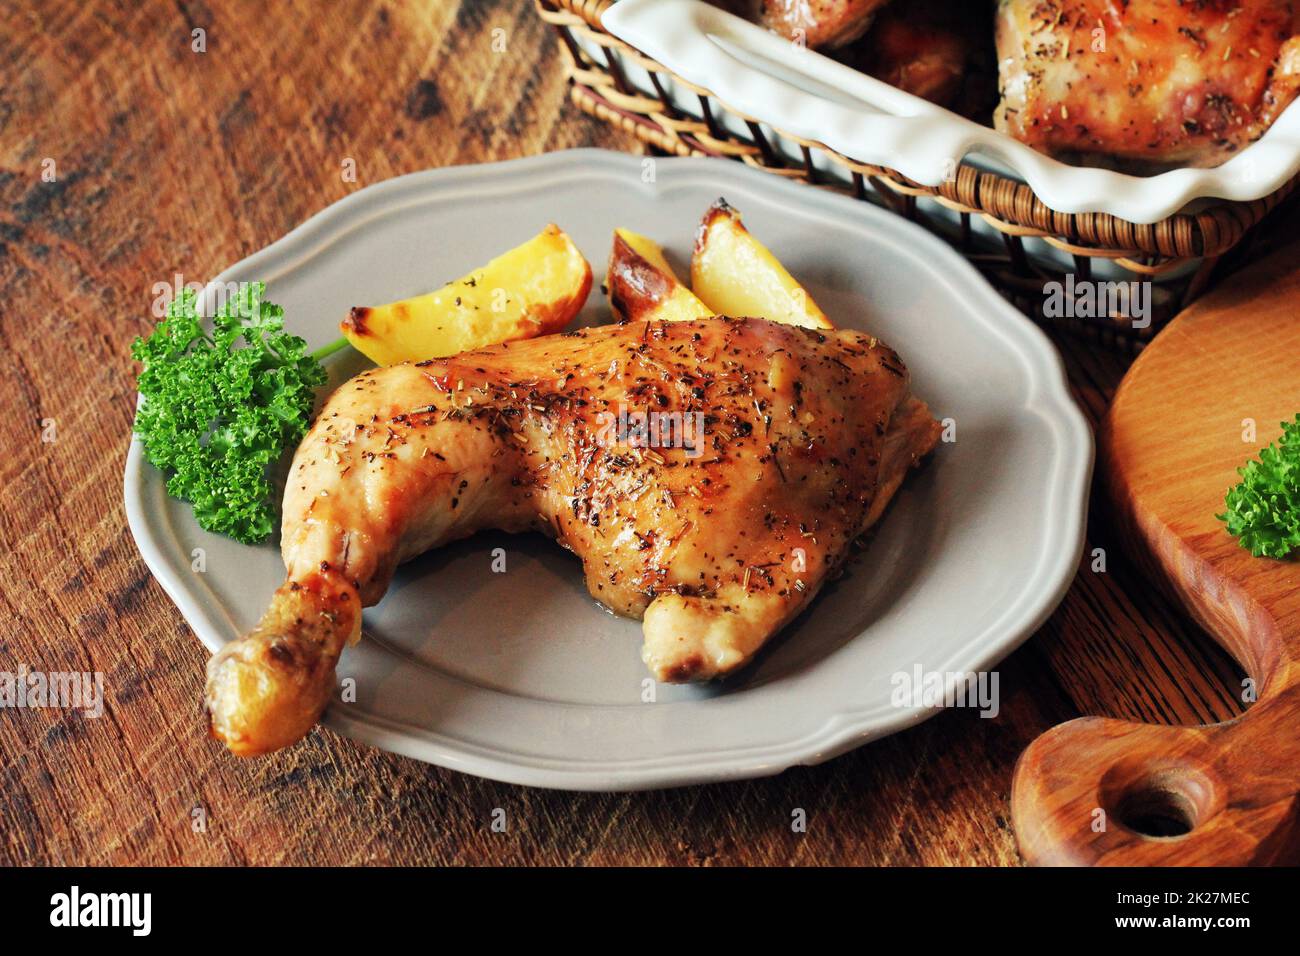 Grilled chicken leg with potato for garnish. Wooden background. Stock Photo